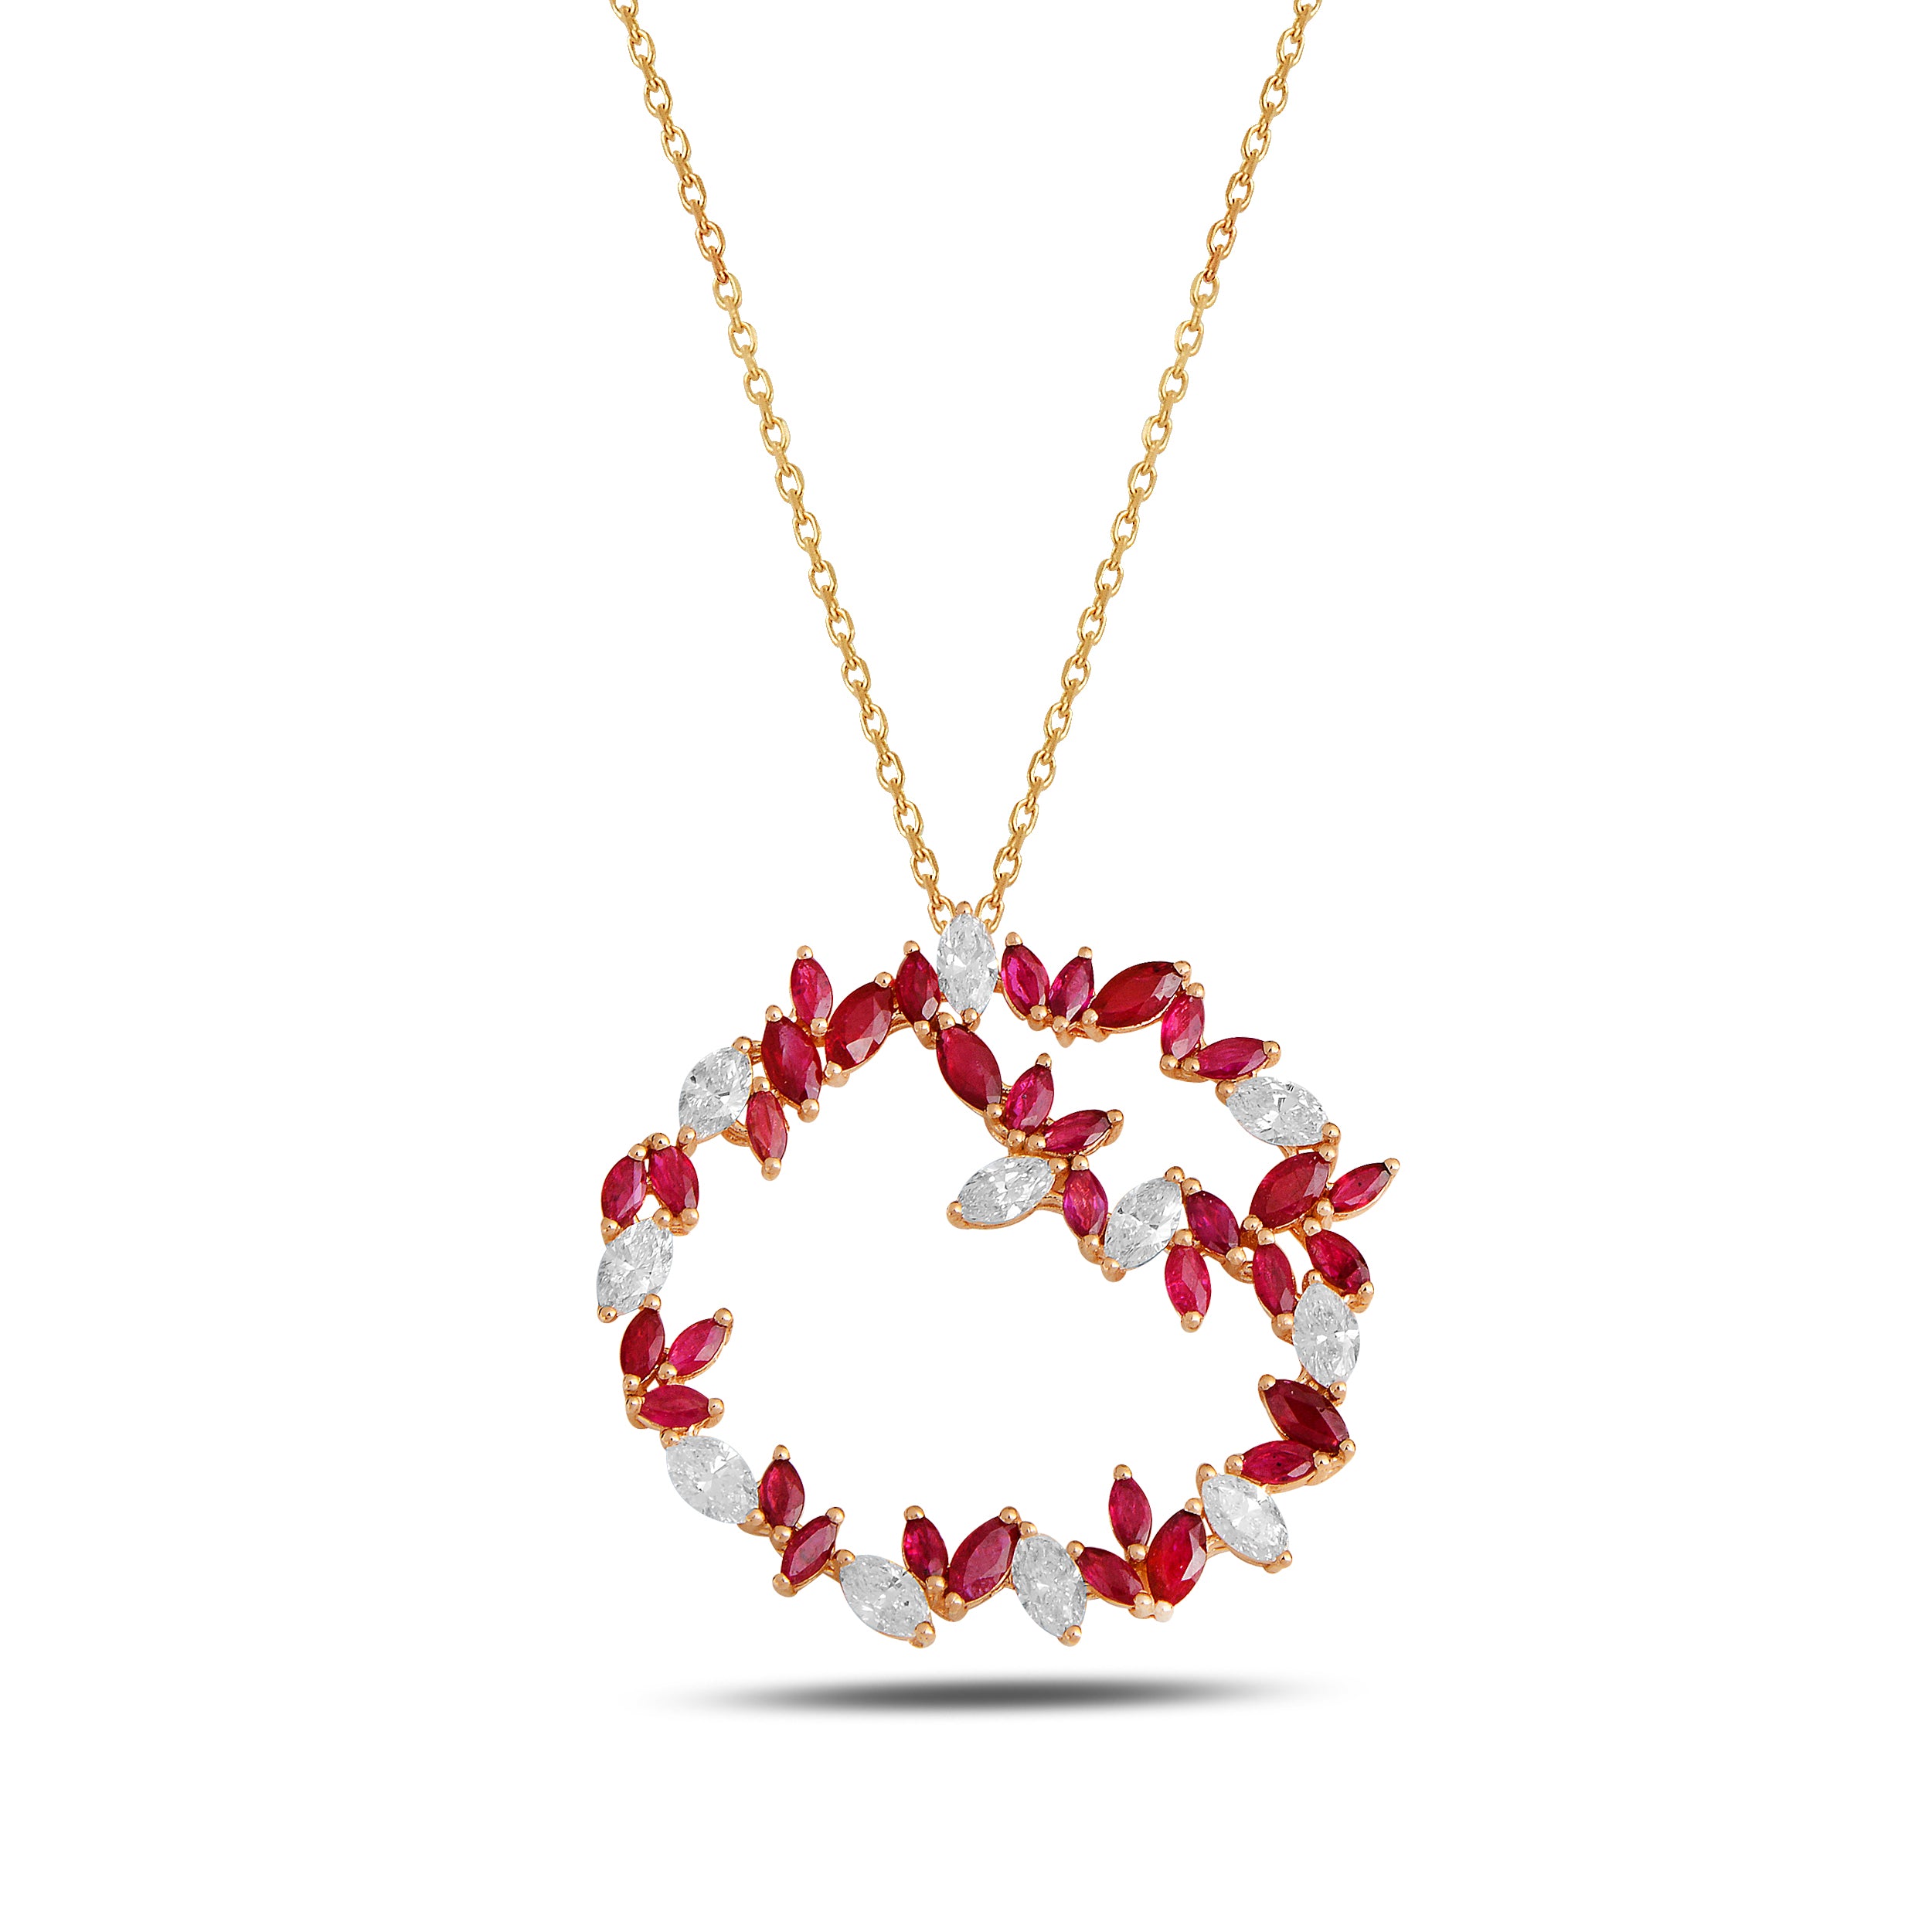 Eterna Medallion with Ruby